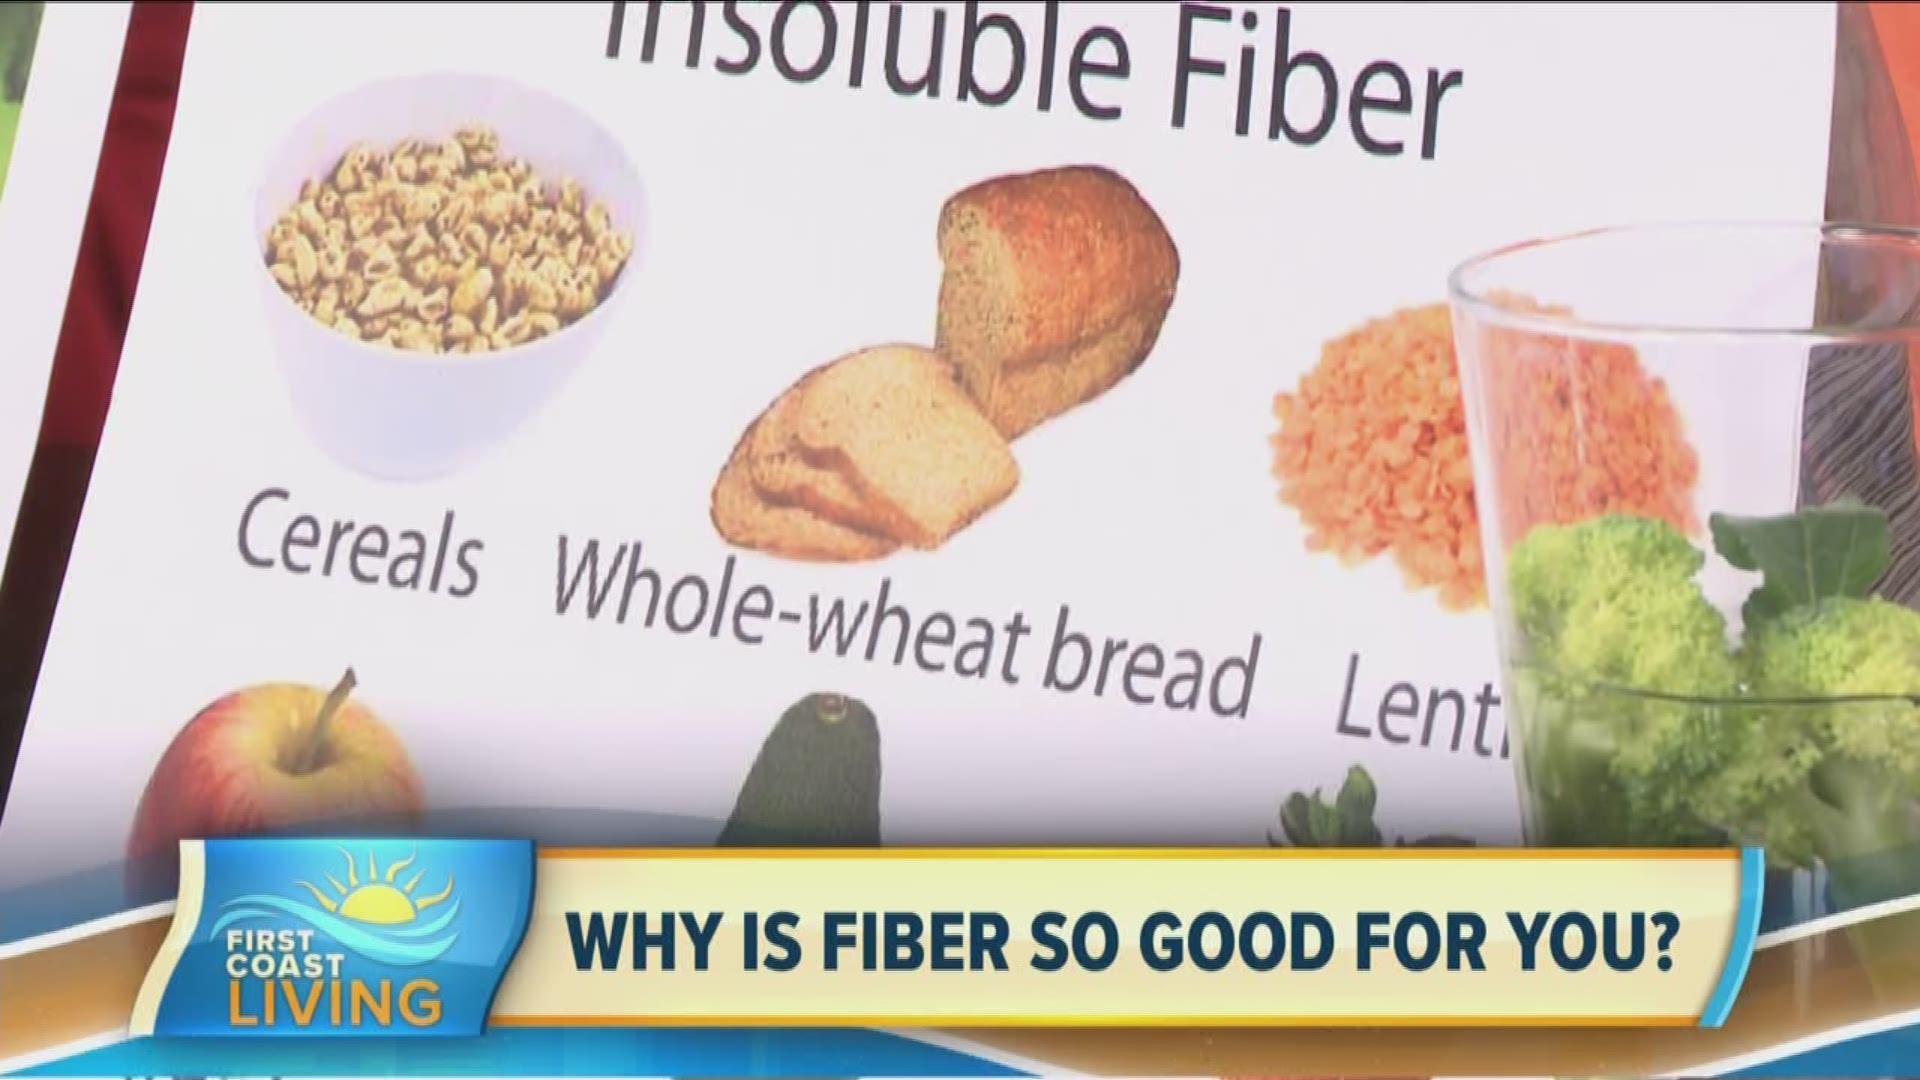 We all know that fiber is good for us, but why? How can we incorporate it into our diets?